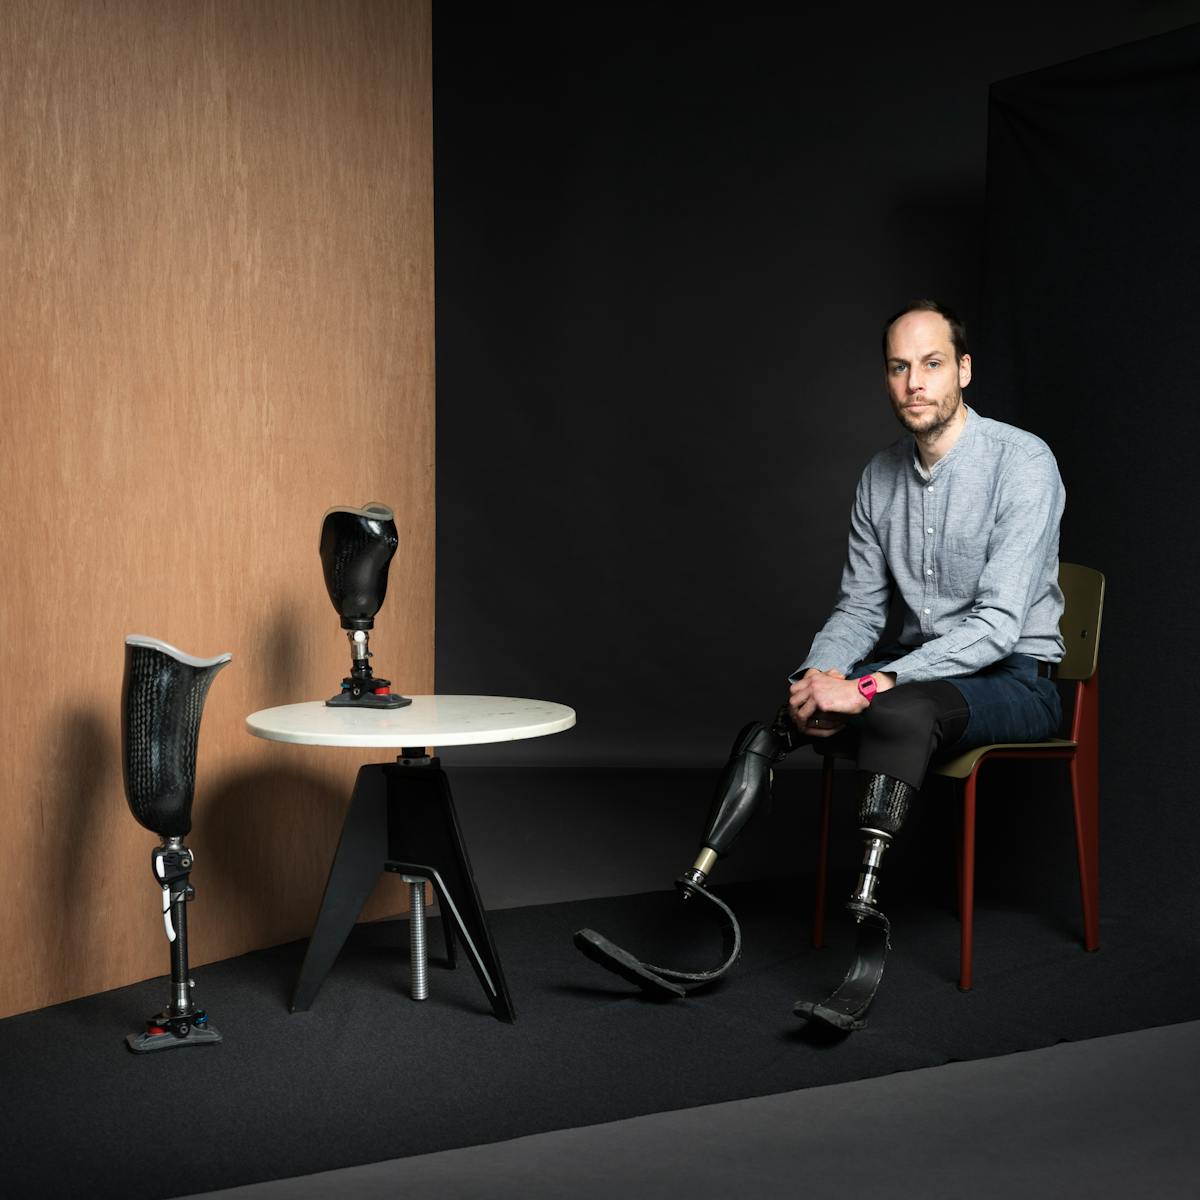 Portrait photograph of Harry Parker. He is wearing a grey shirt and jeans. He has short brown hair and a beard. Harry is sitting on a chair, his prosthetic limbs are resting on the ground. Next to his chair is a white table which has a prosthetic limb upon it. On the floor next to the table is another prosthetic limb standing upright and behind this, a wooden panel. 